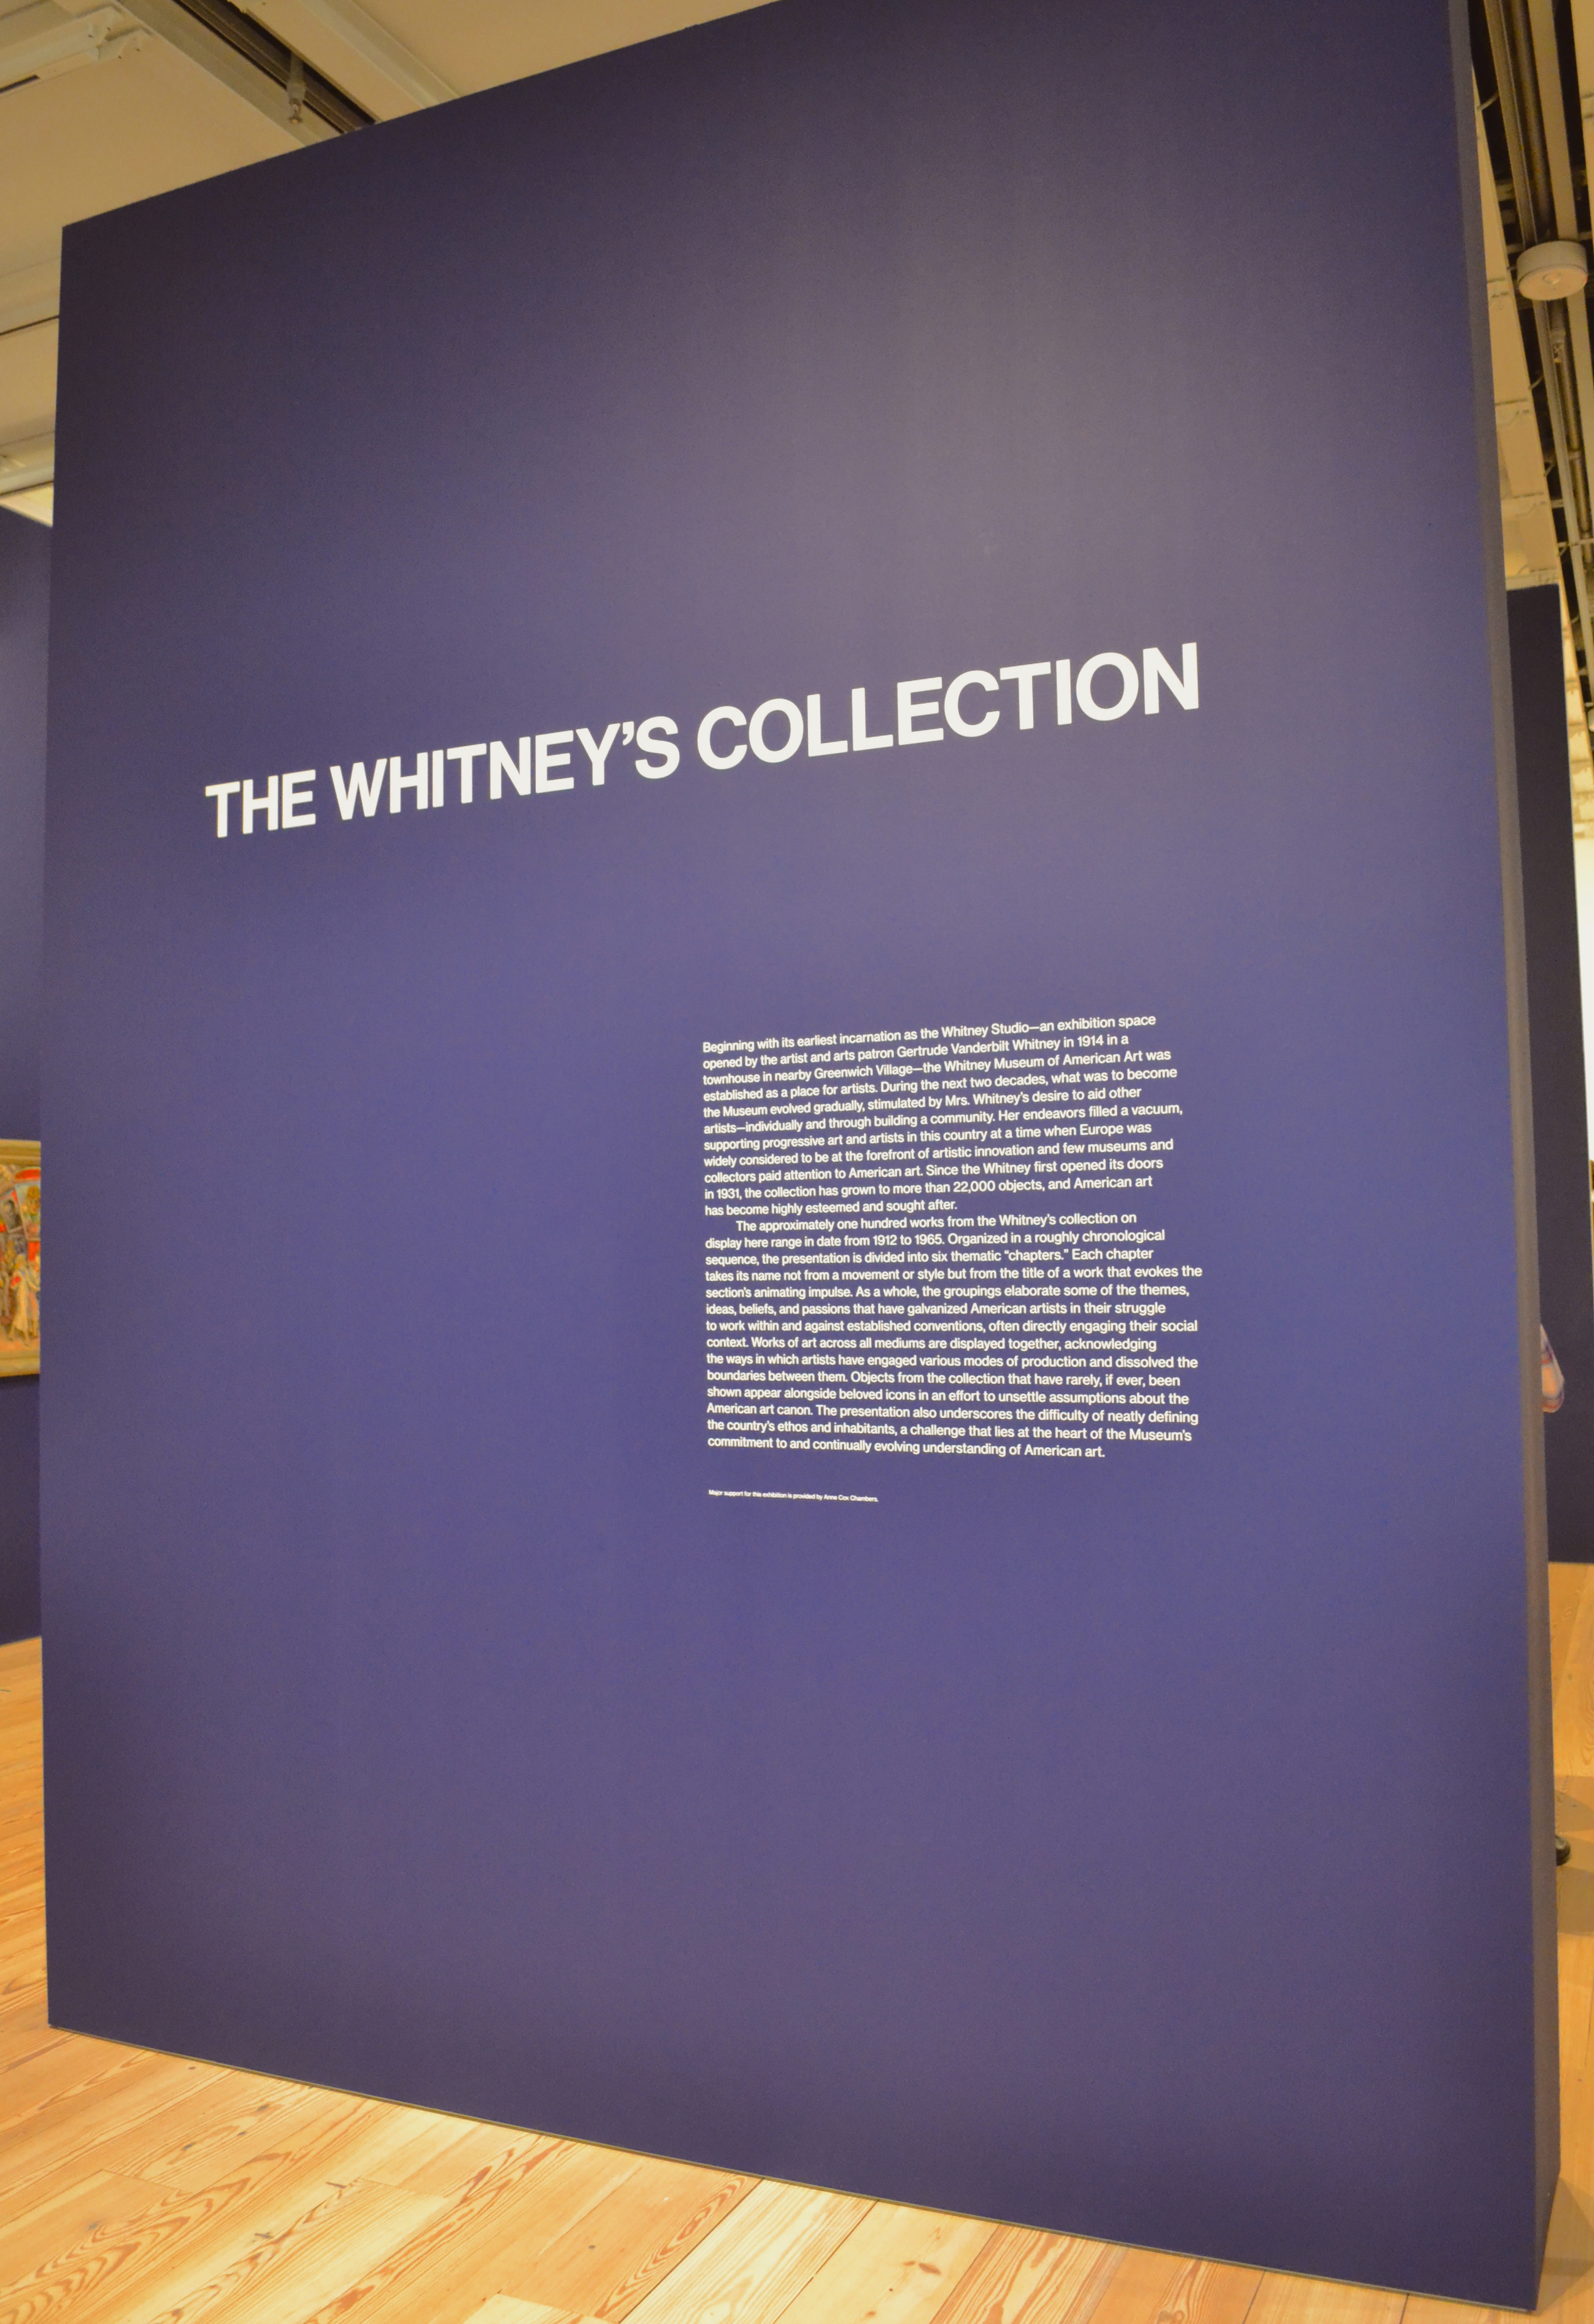 The Whitney's Collection